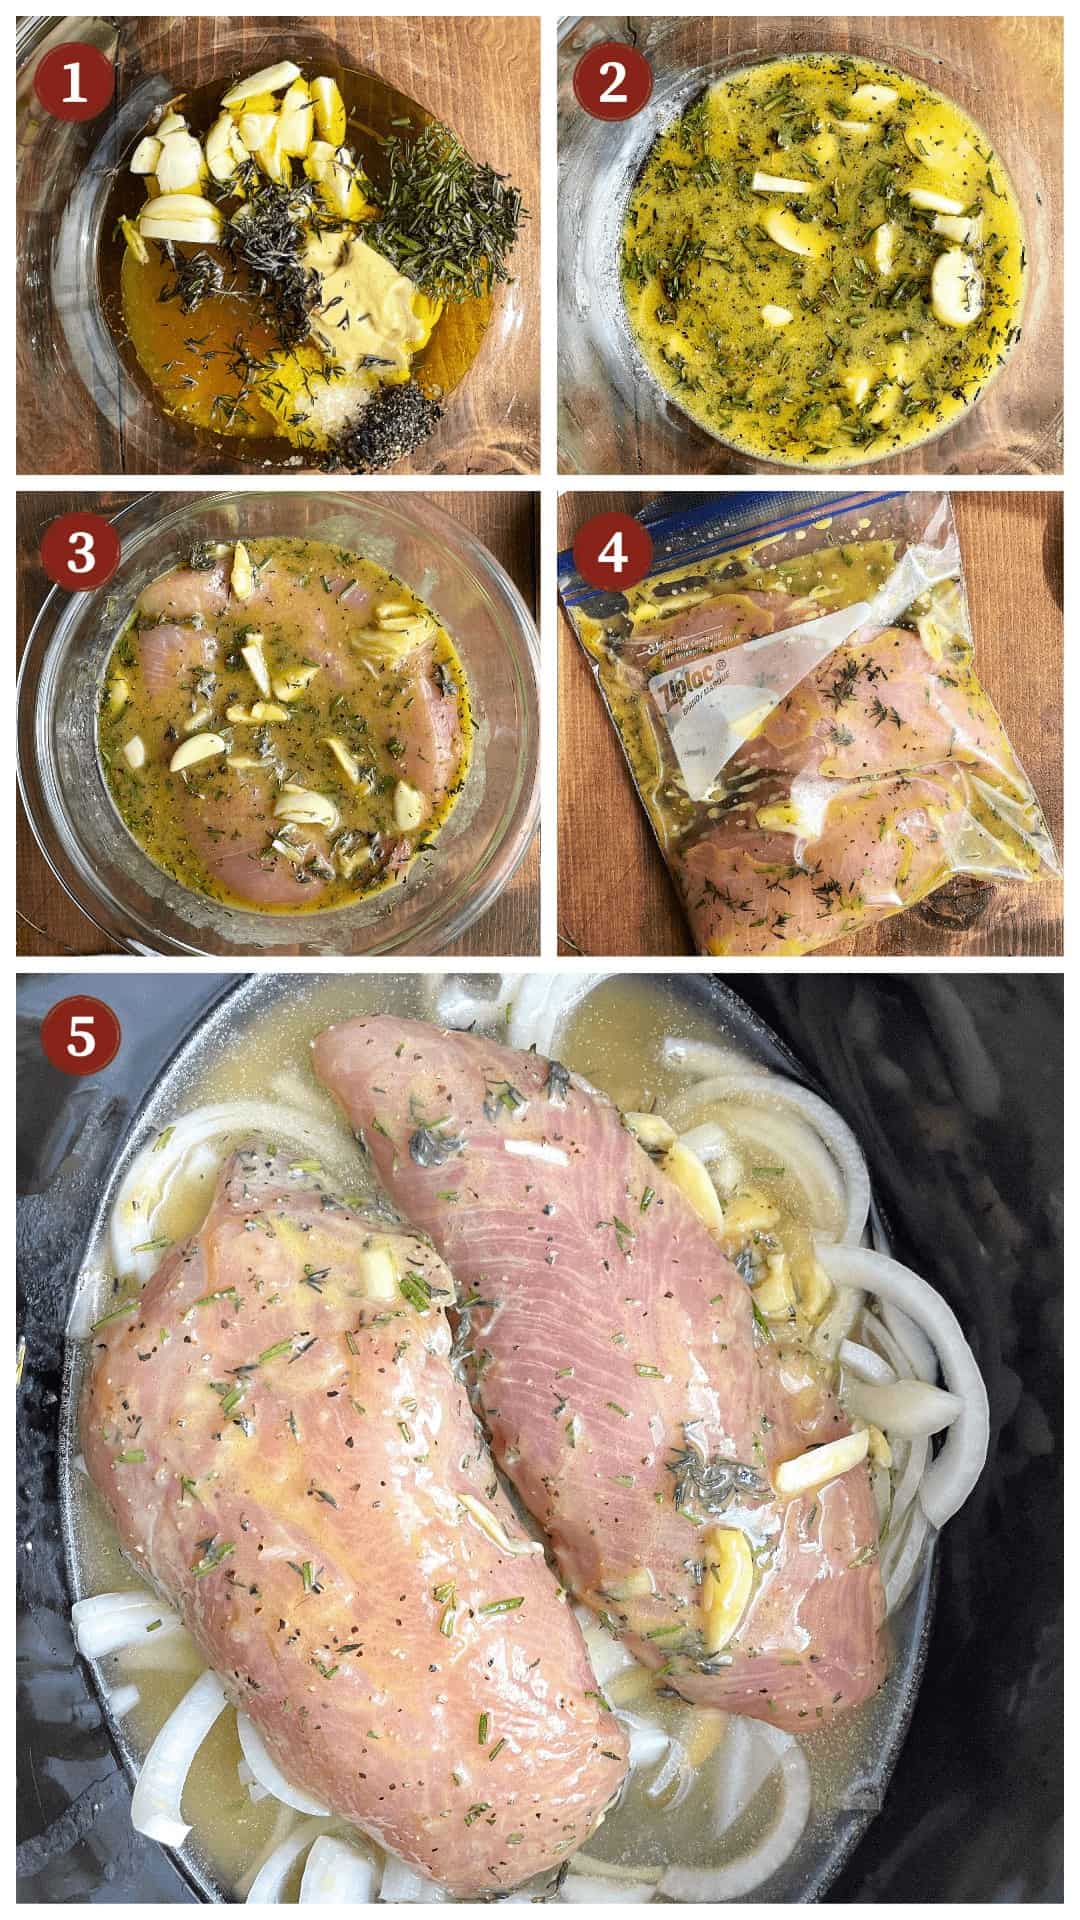 A collage of images showing how to make crockpot turkey tenderloins, steps 1-5.